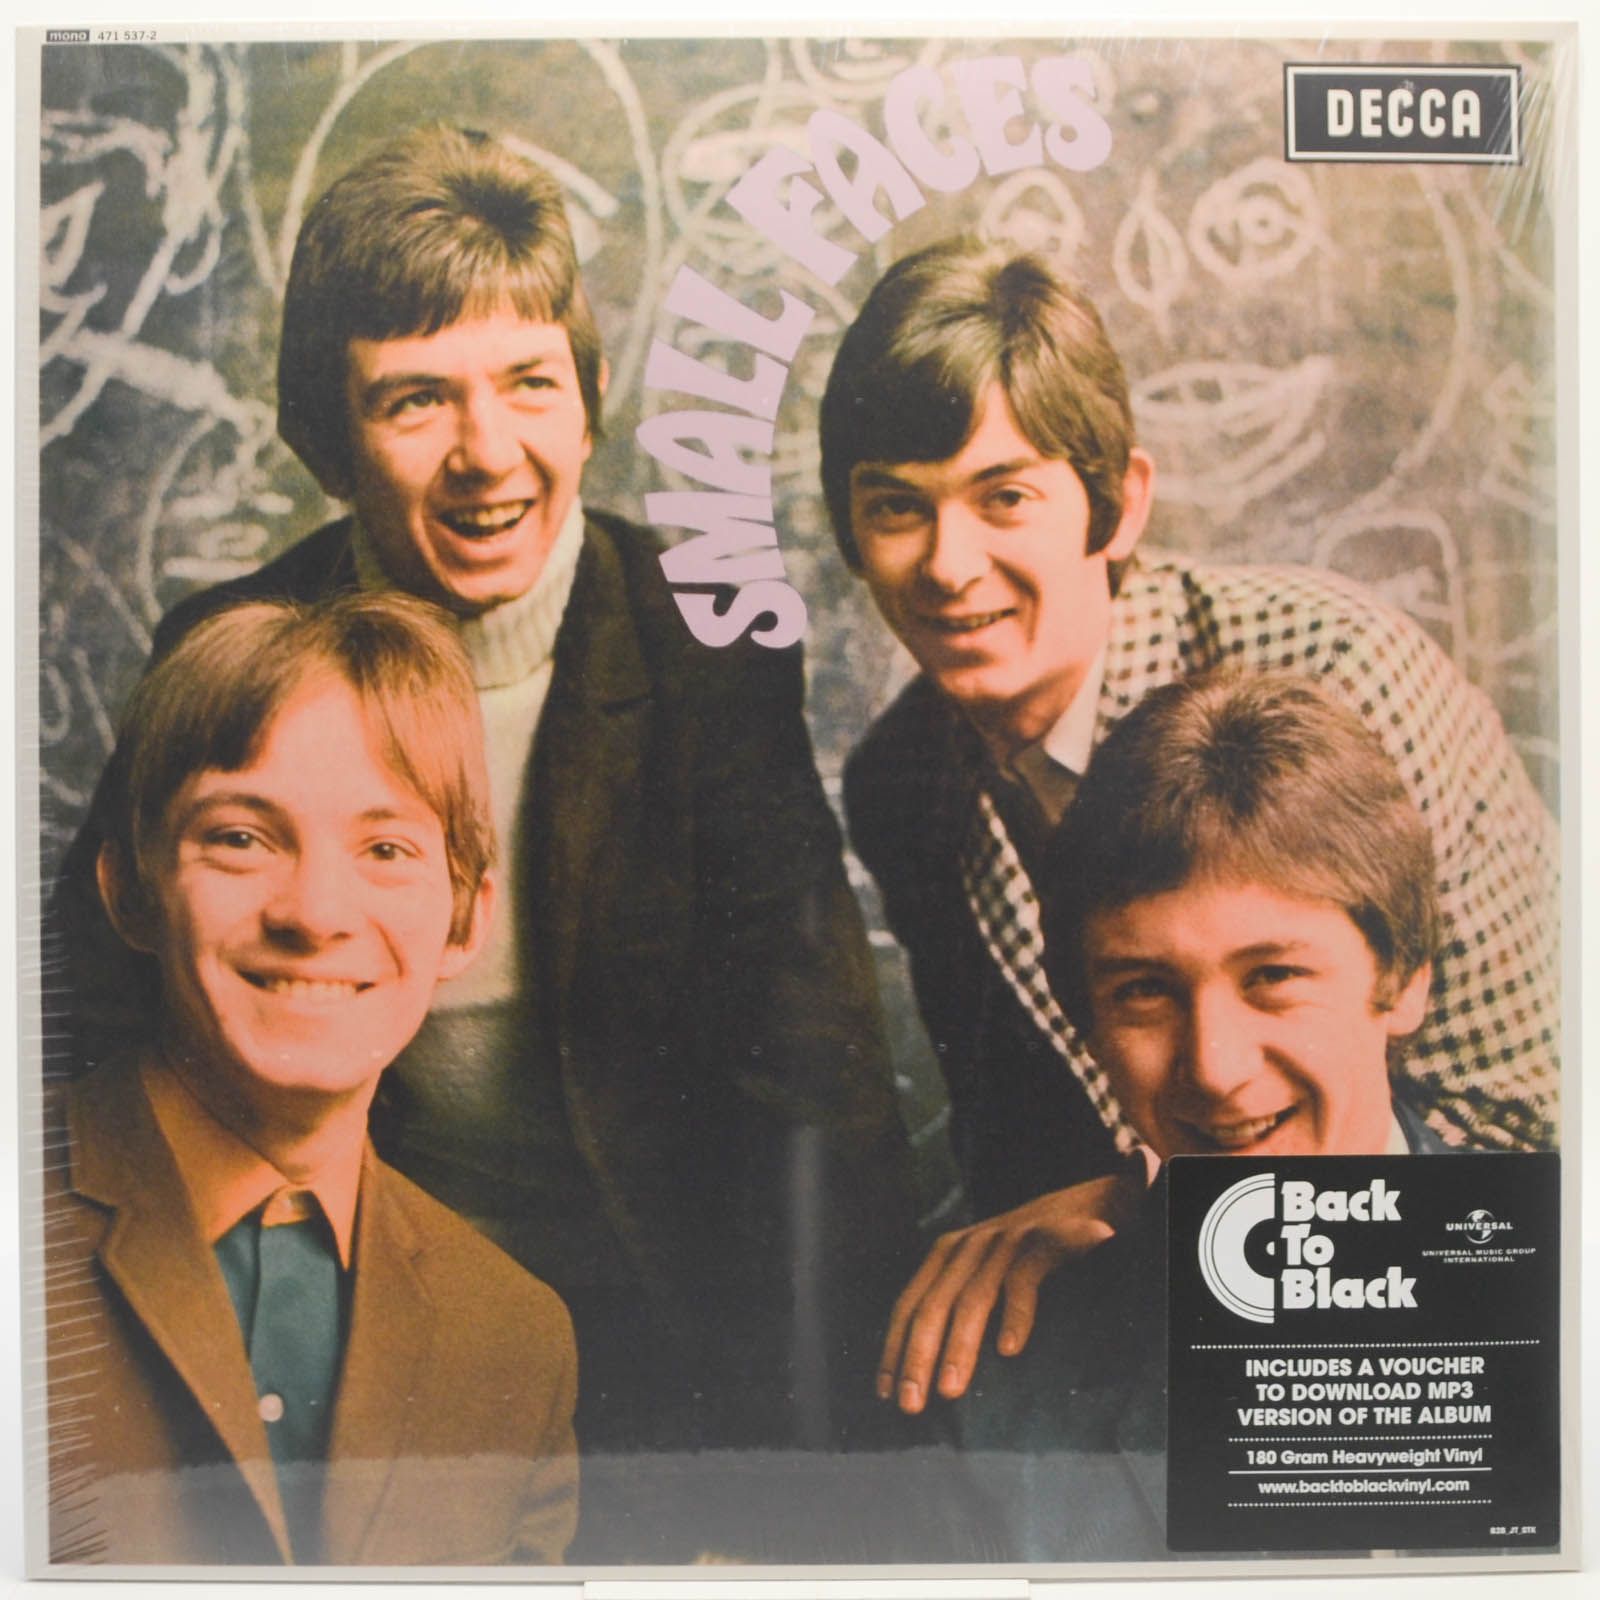 Small Faces — Small Faces, 1966